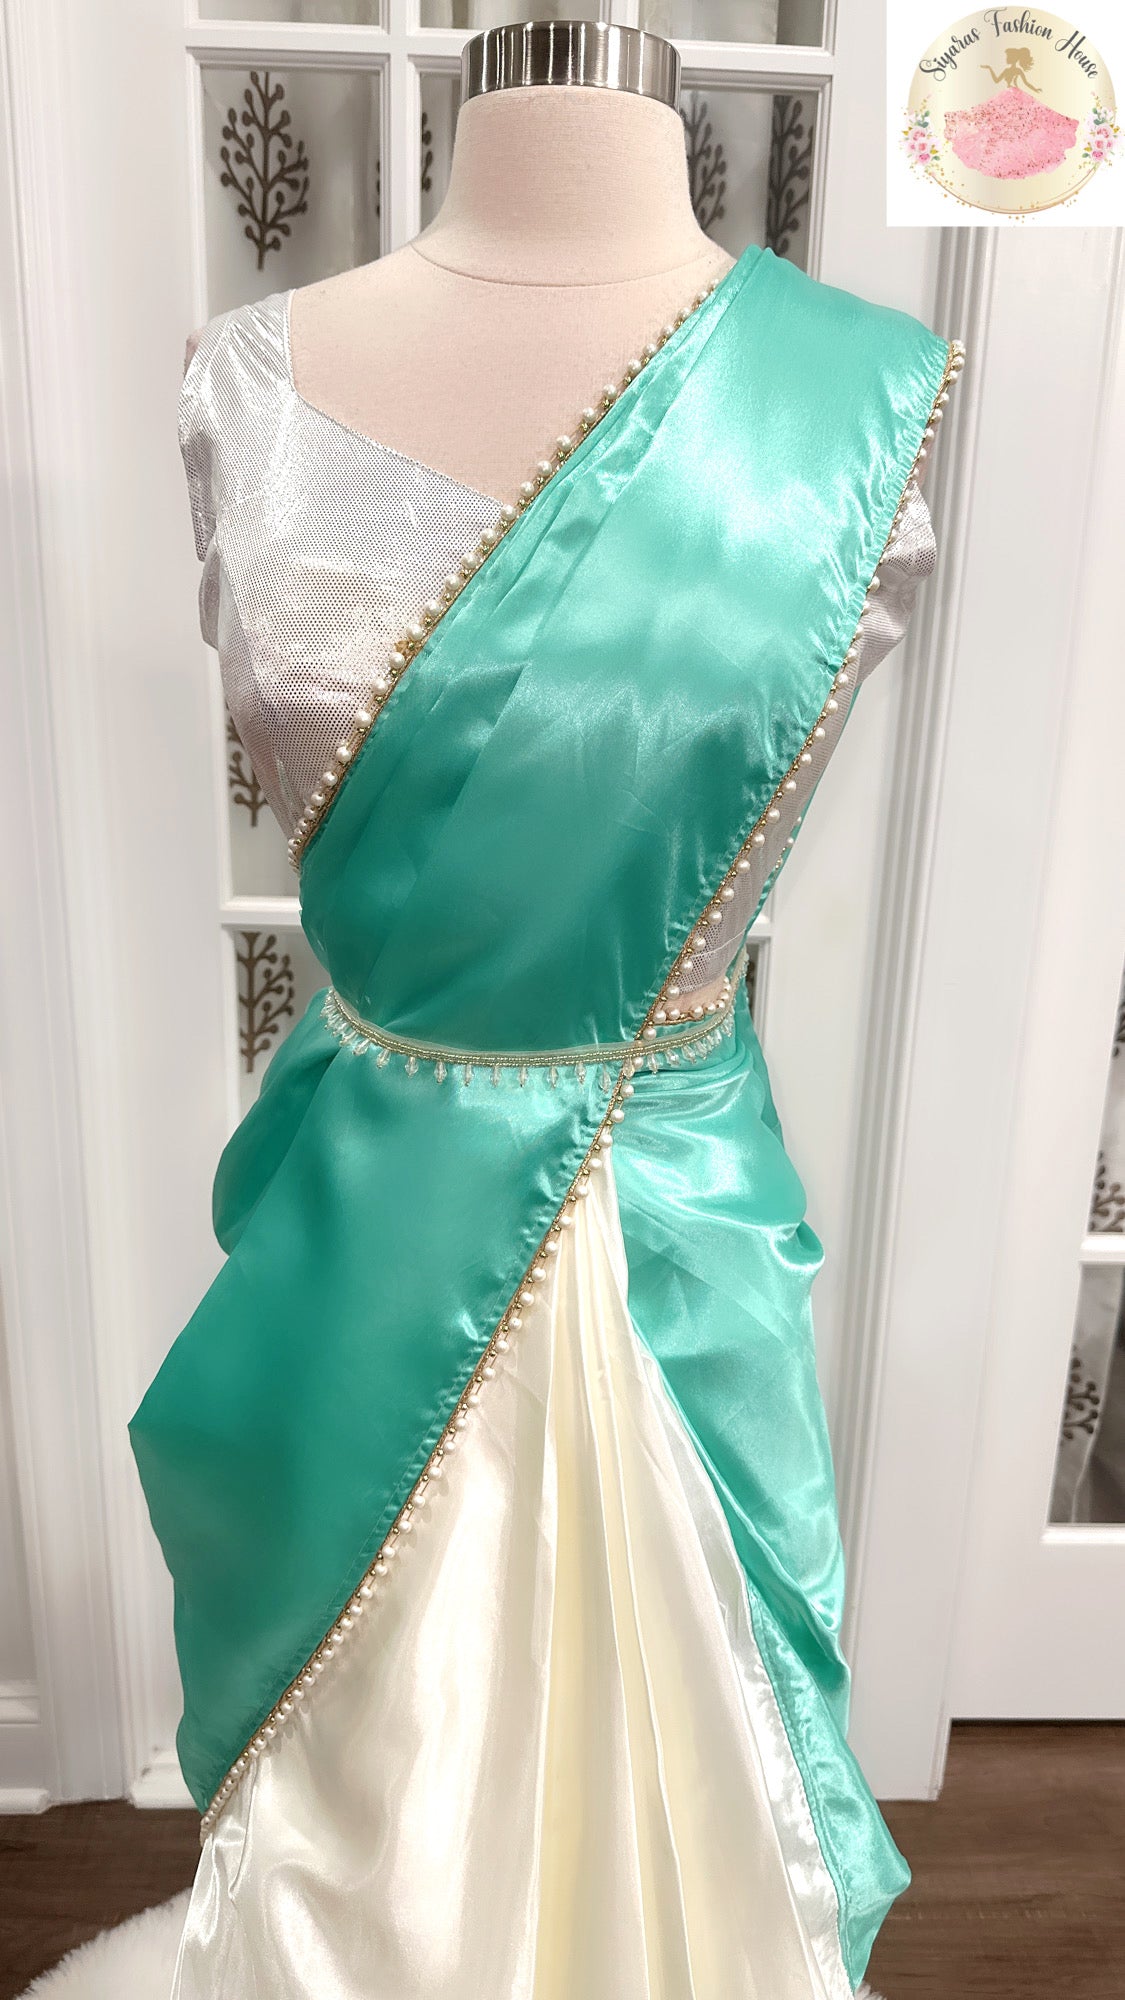 Heavy Satin Silk Saree in Mint and Ivory hues  with Moti lace border and metallic Blouse fully stitched standard size